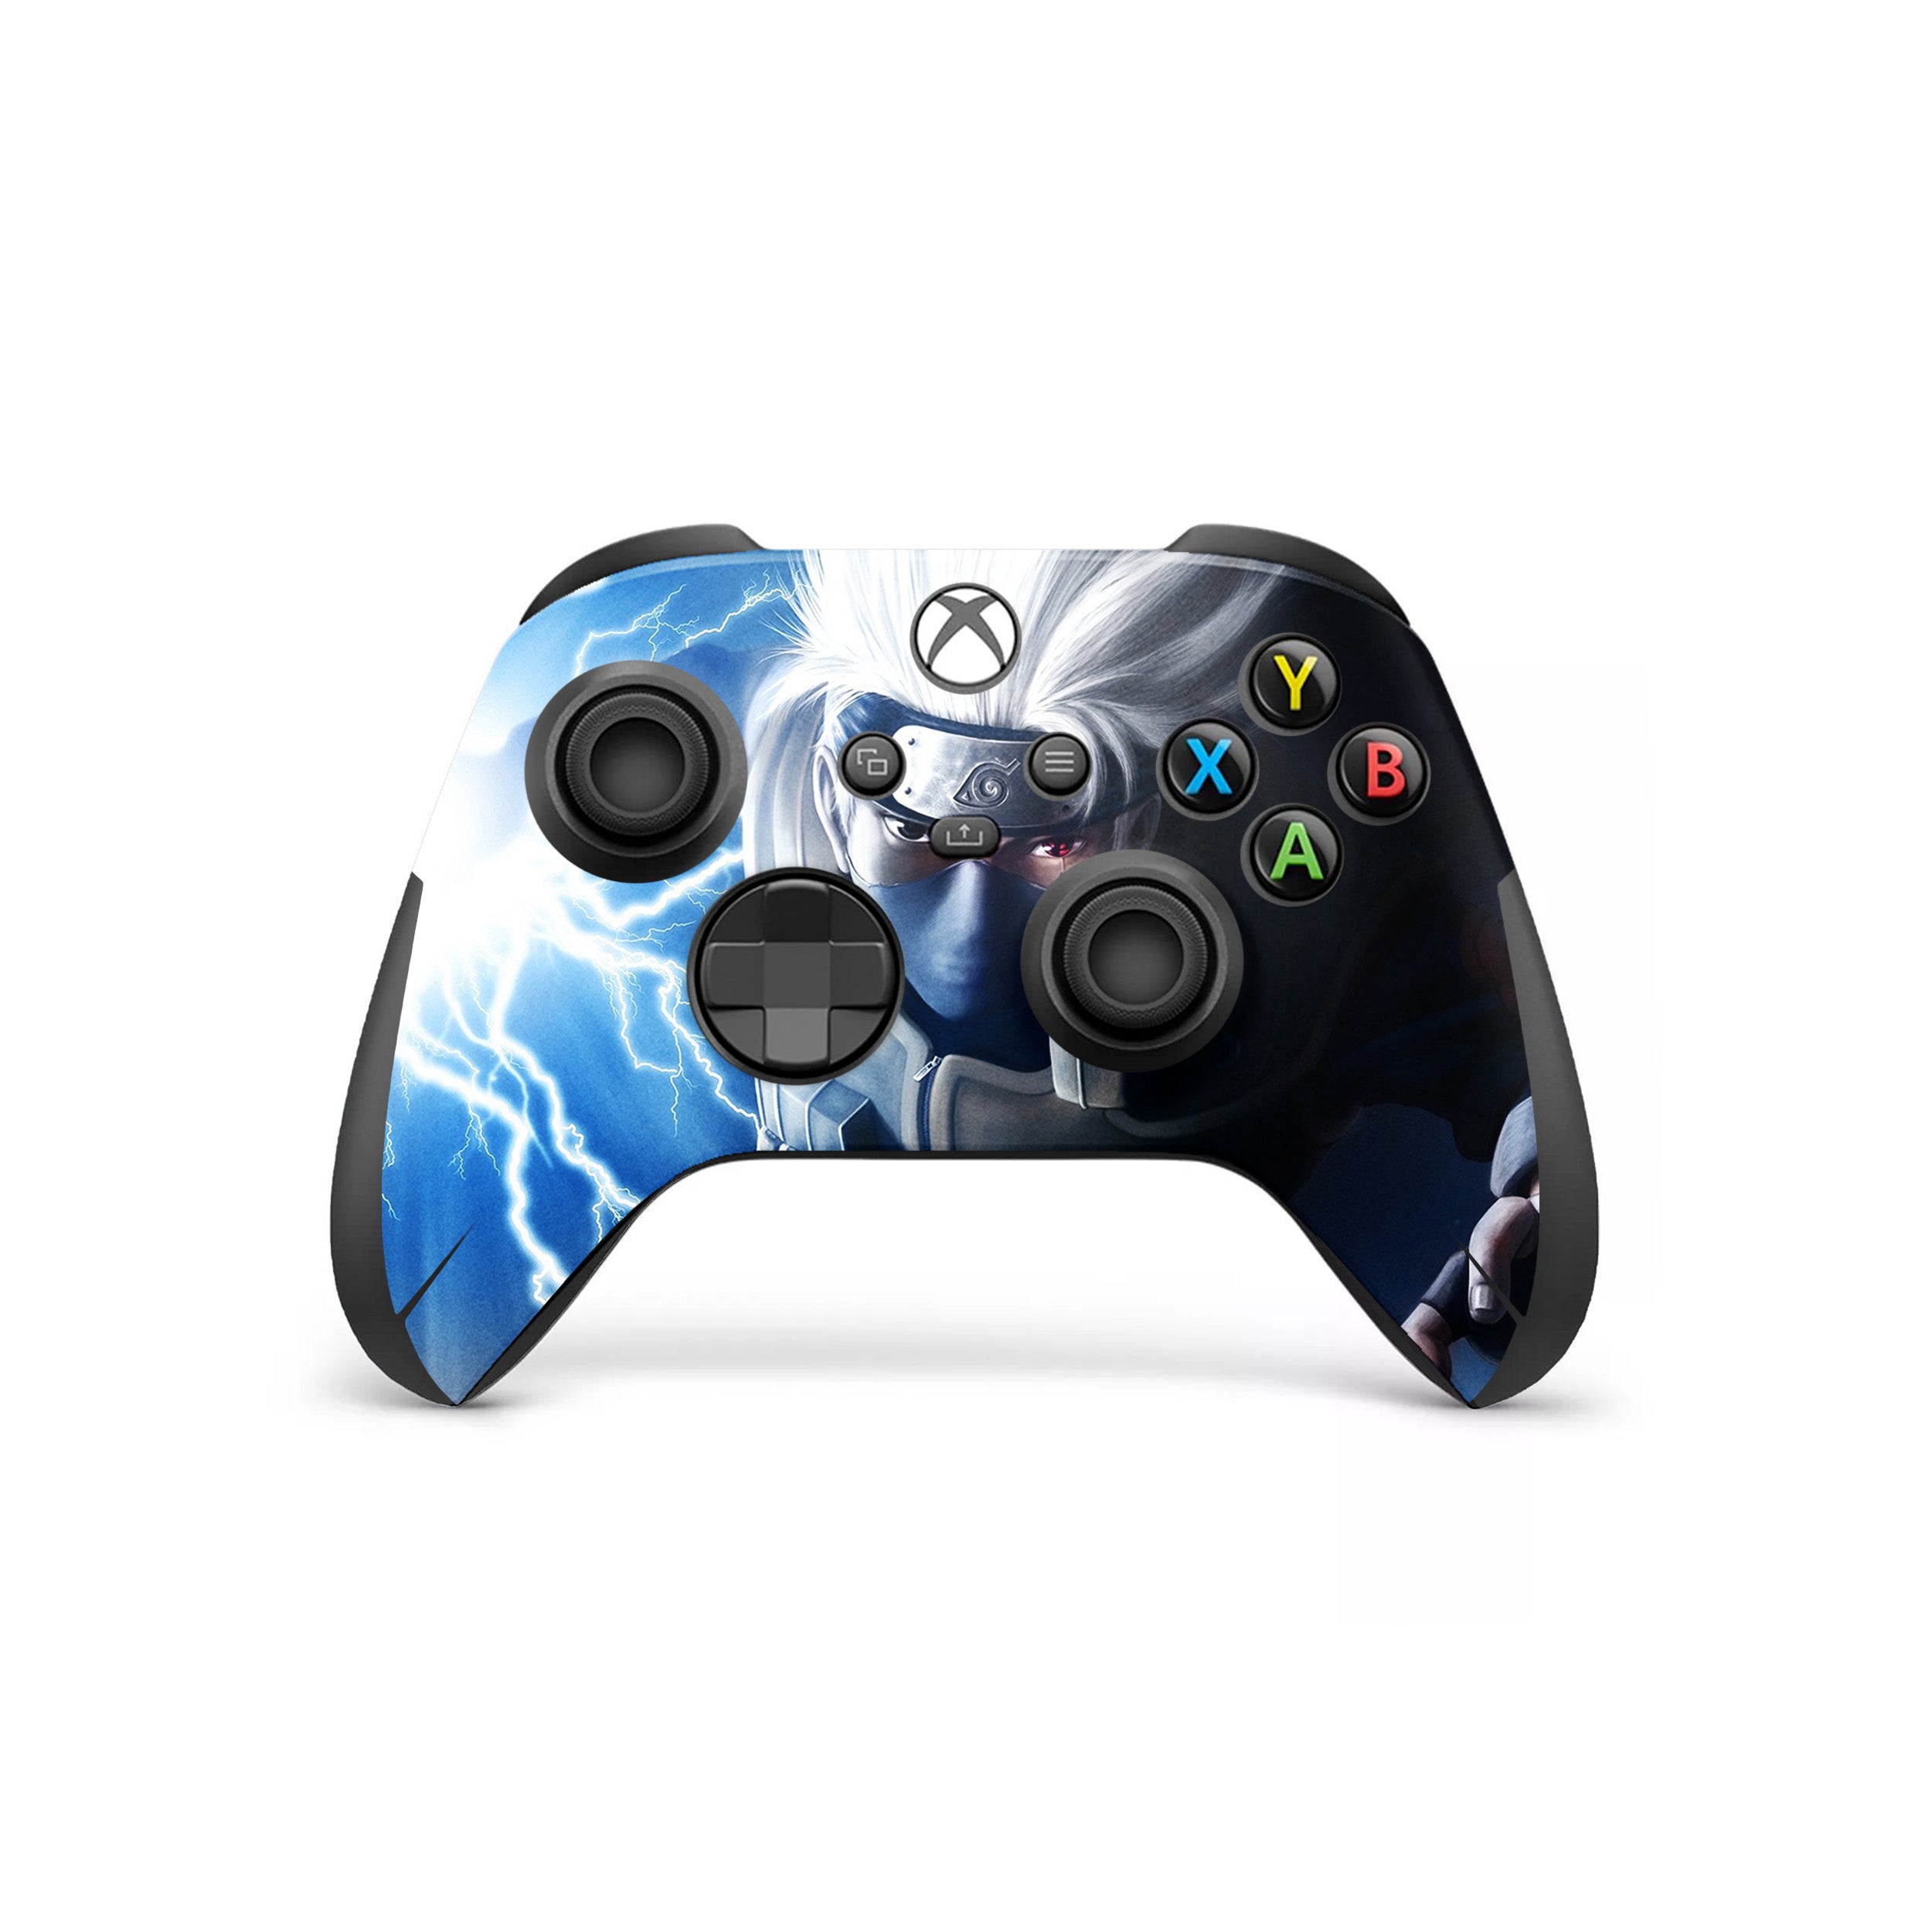 A video game skin featuring a Naruto Kakashi design for the Xbox Wireless Controller.